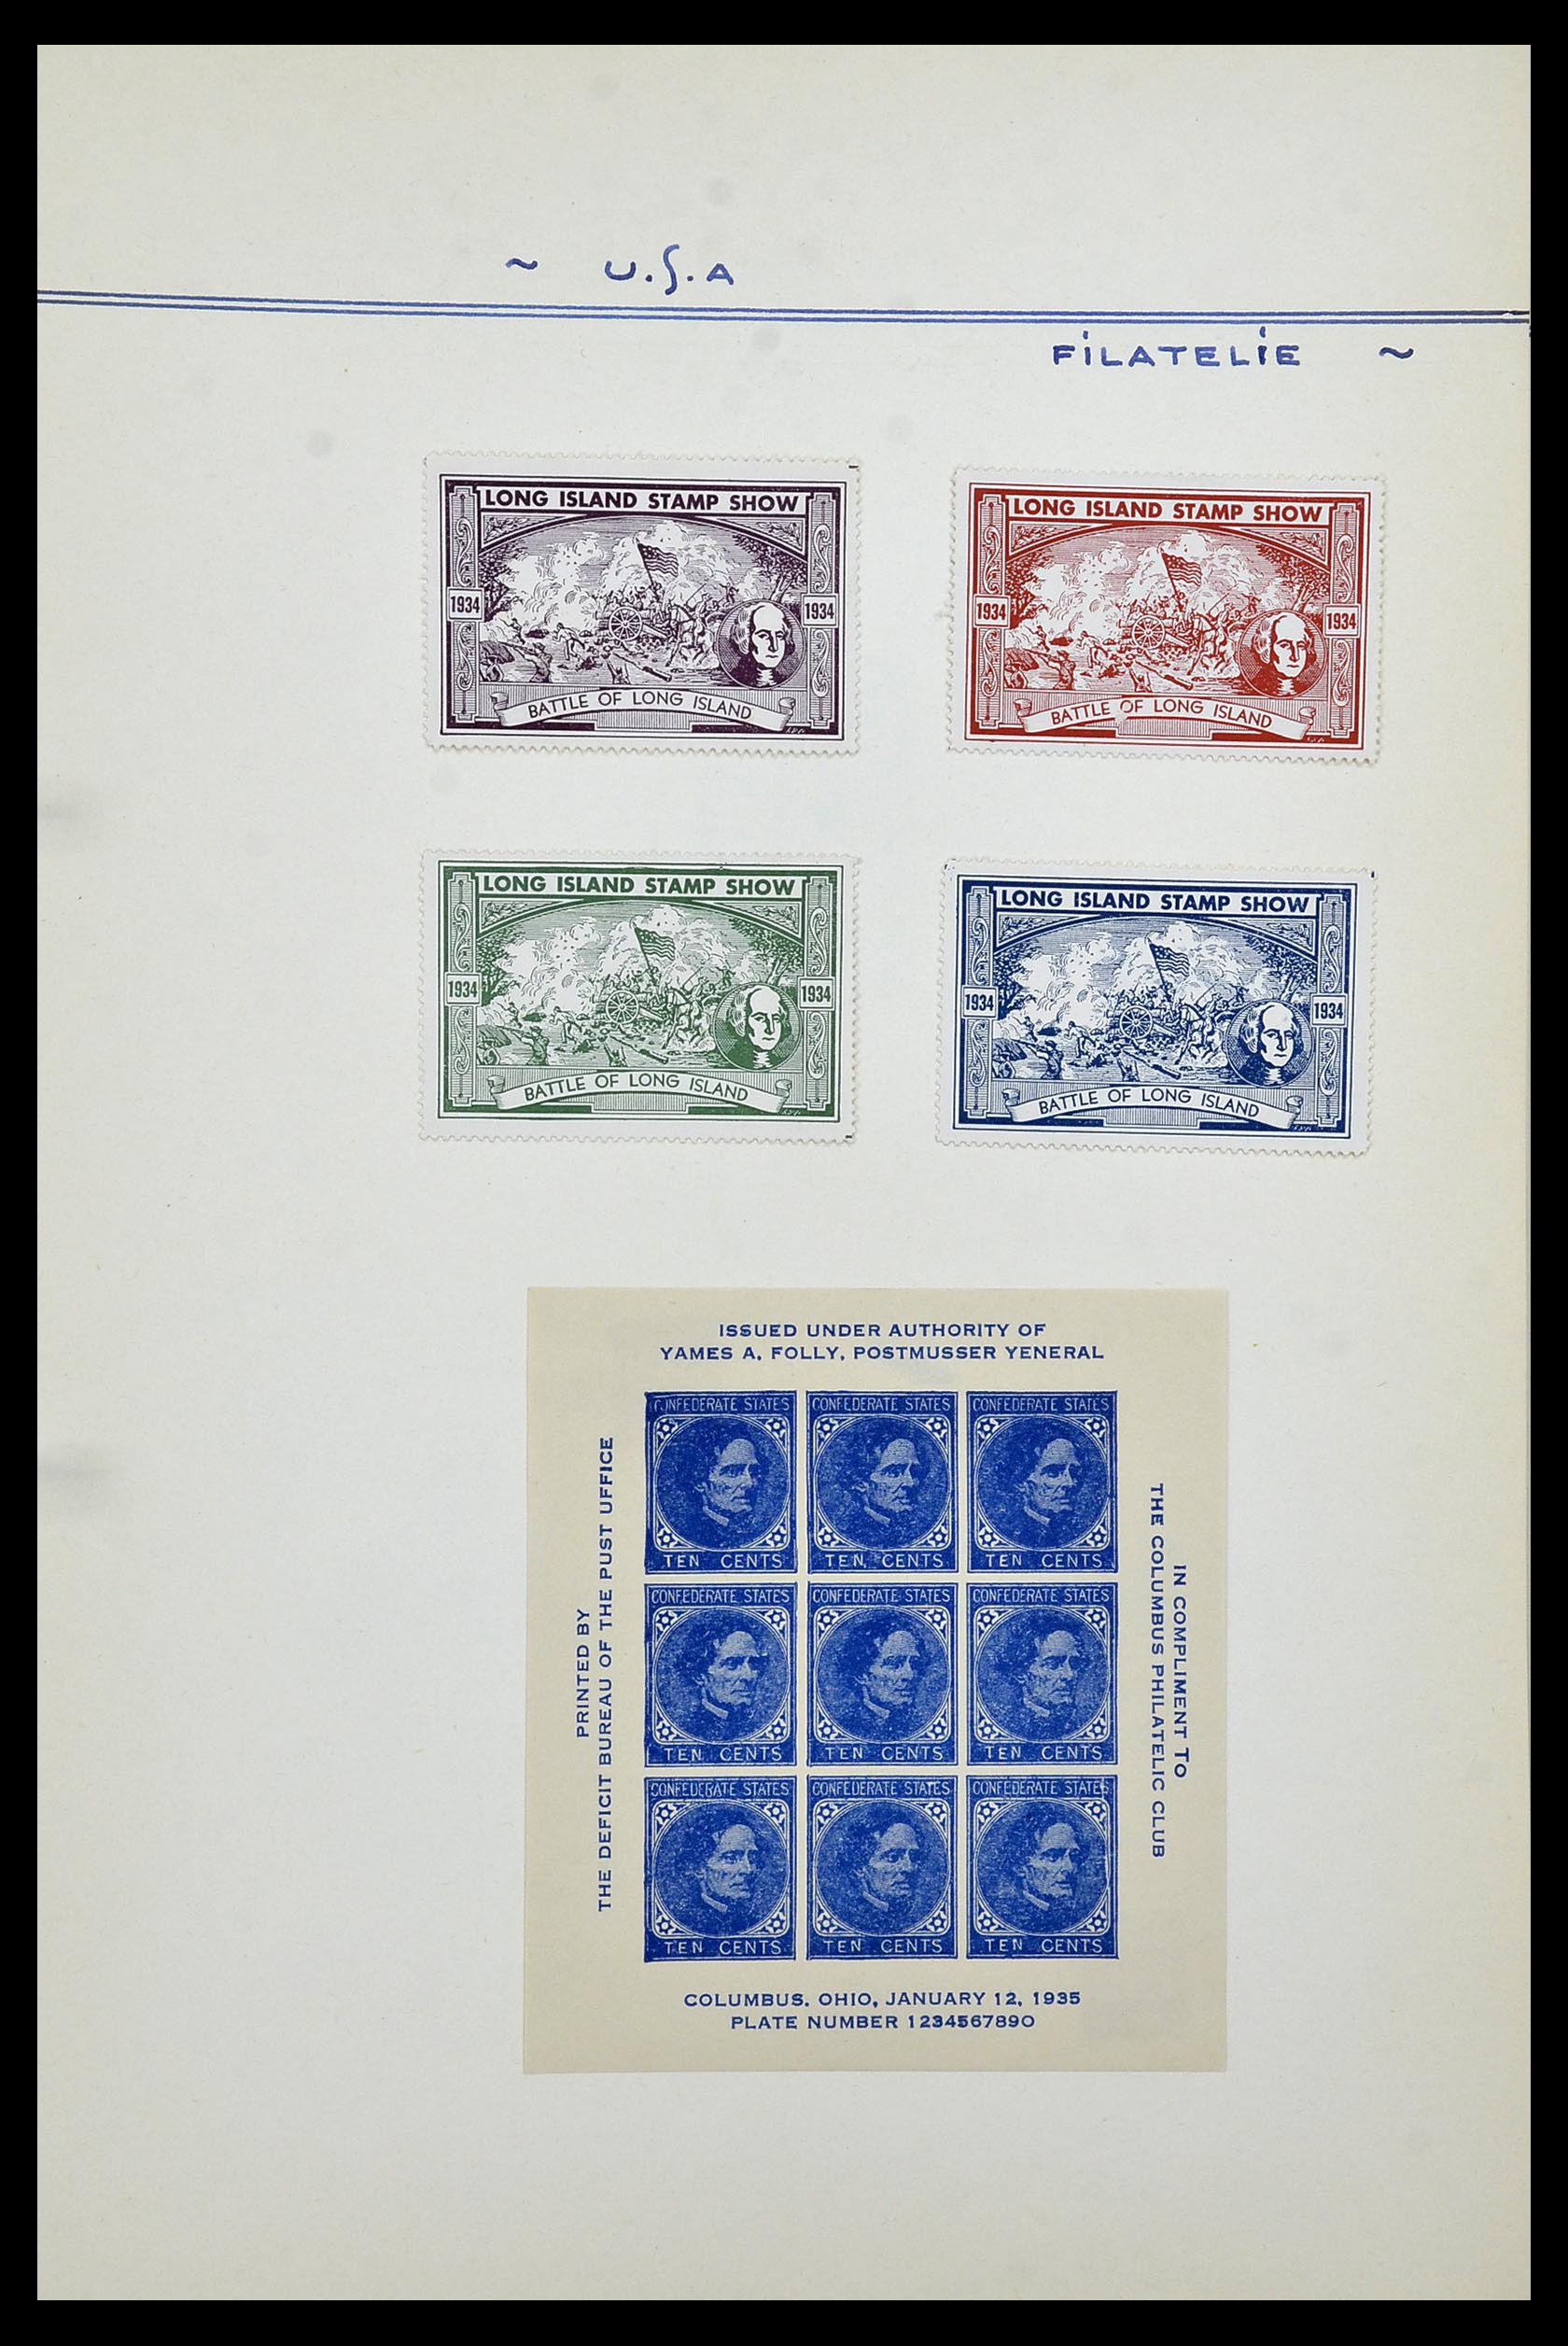 34486 030 - Stamp Collection 34486 USA philatelic labels 1926-1960.